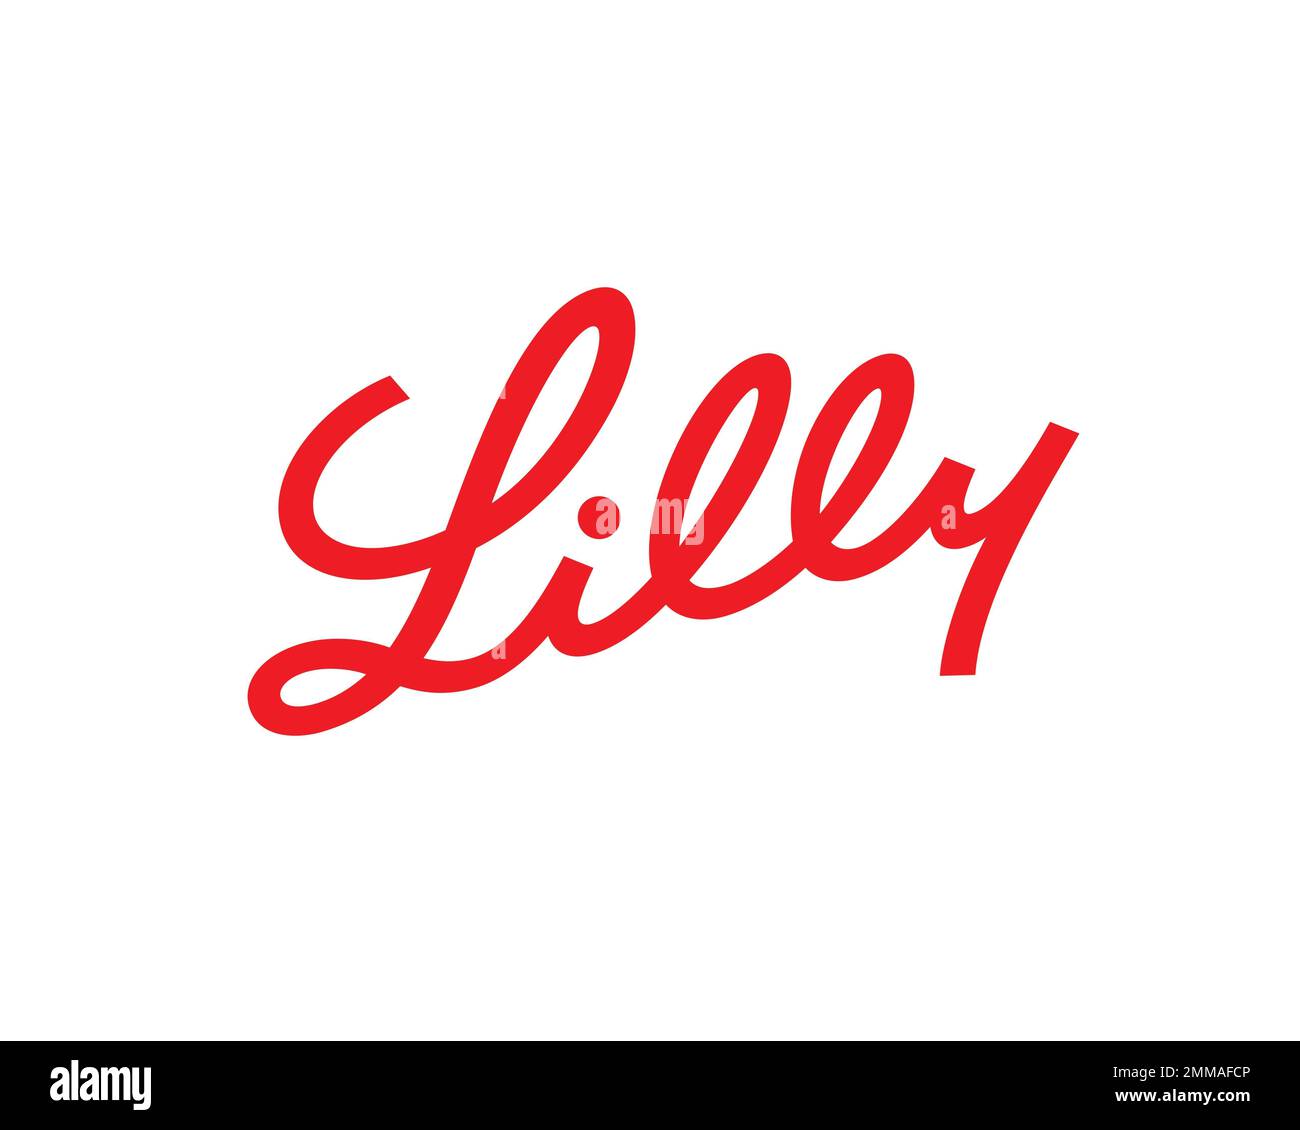 Eli Lilly and Company, rotated, white background, logo, brand name ...